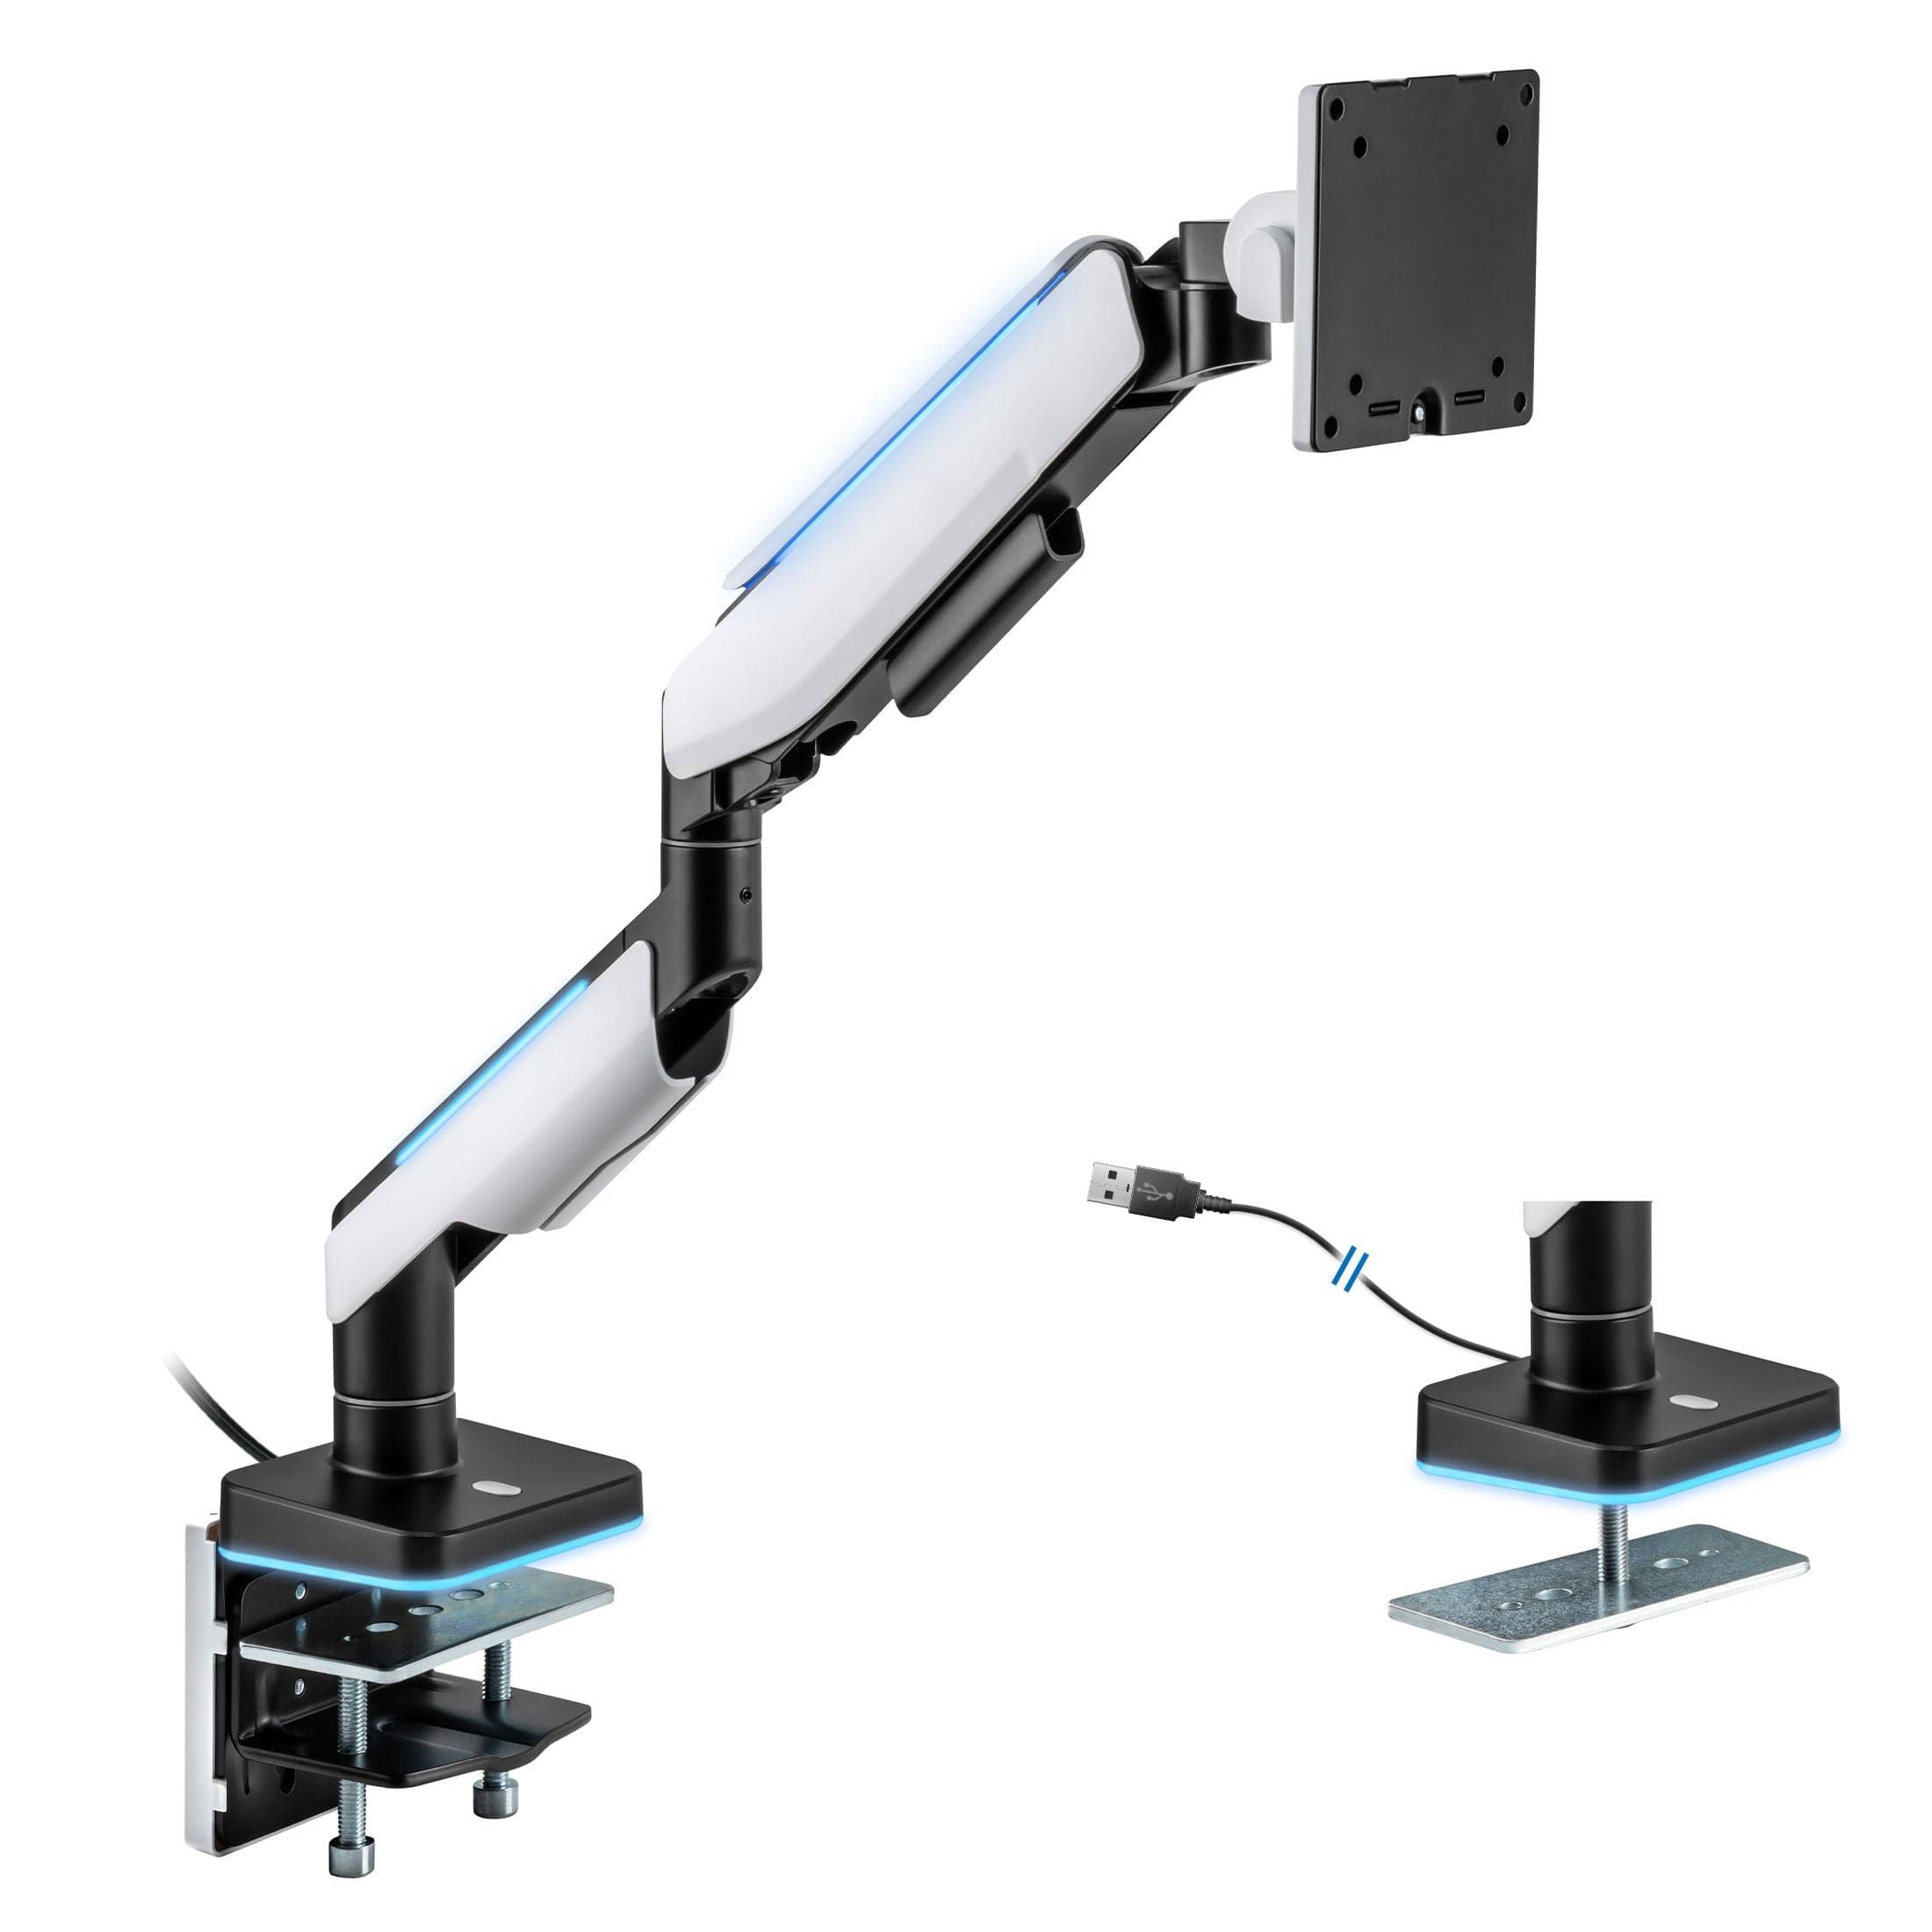 Heavy-Duty Single Monitor Arm for Ultrawide Screens Up To 49"